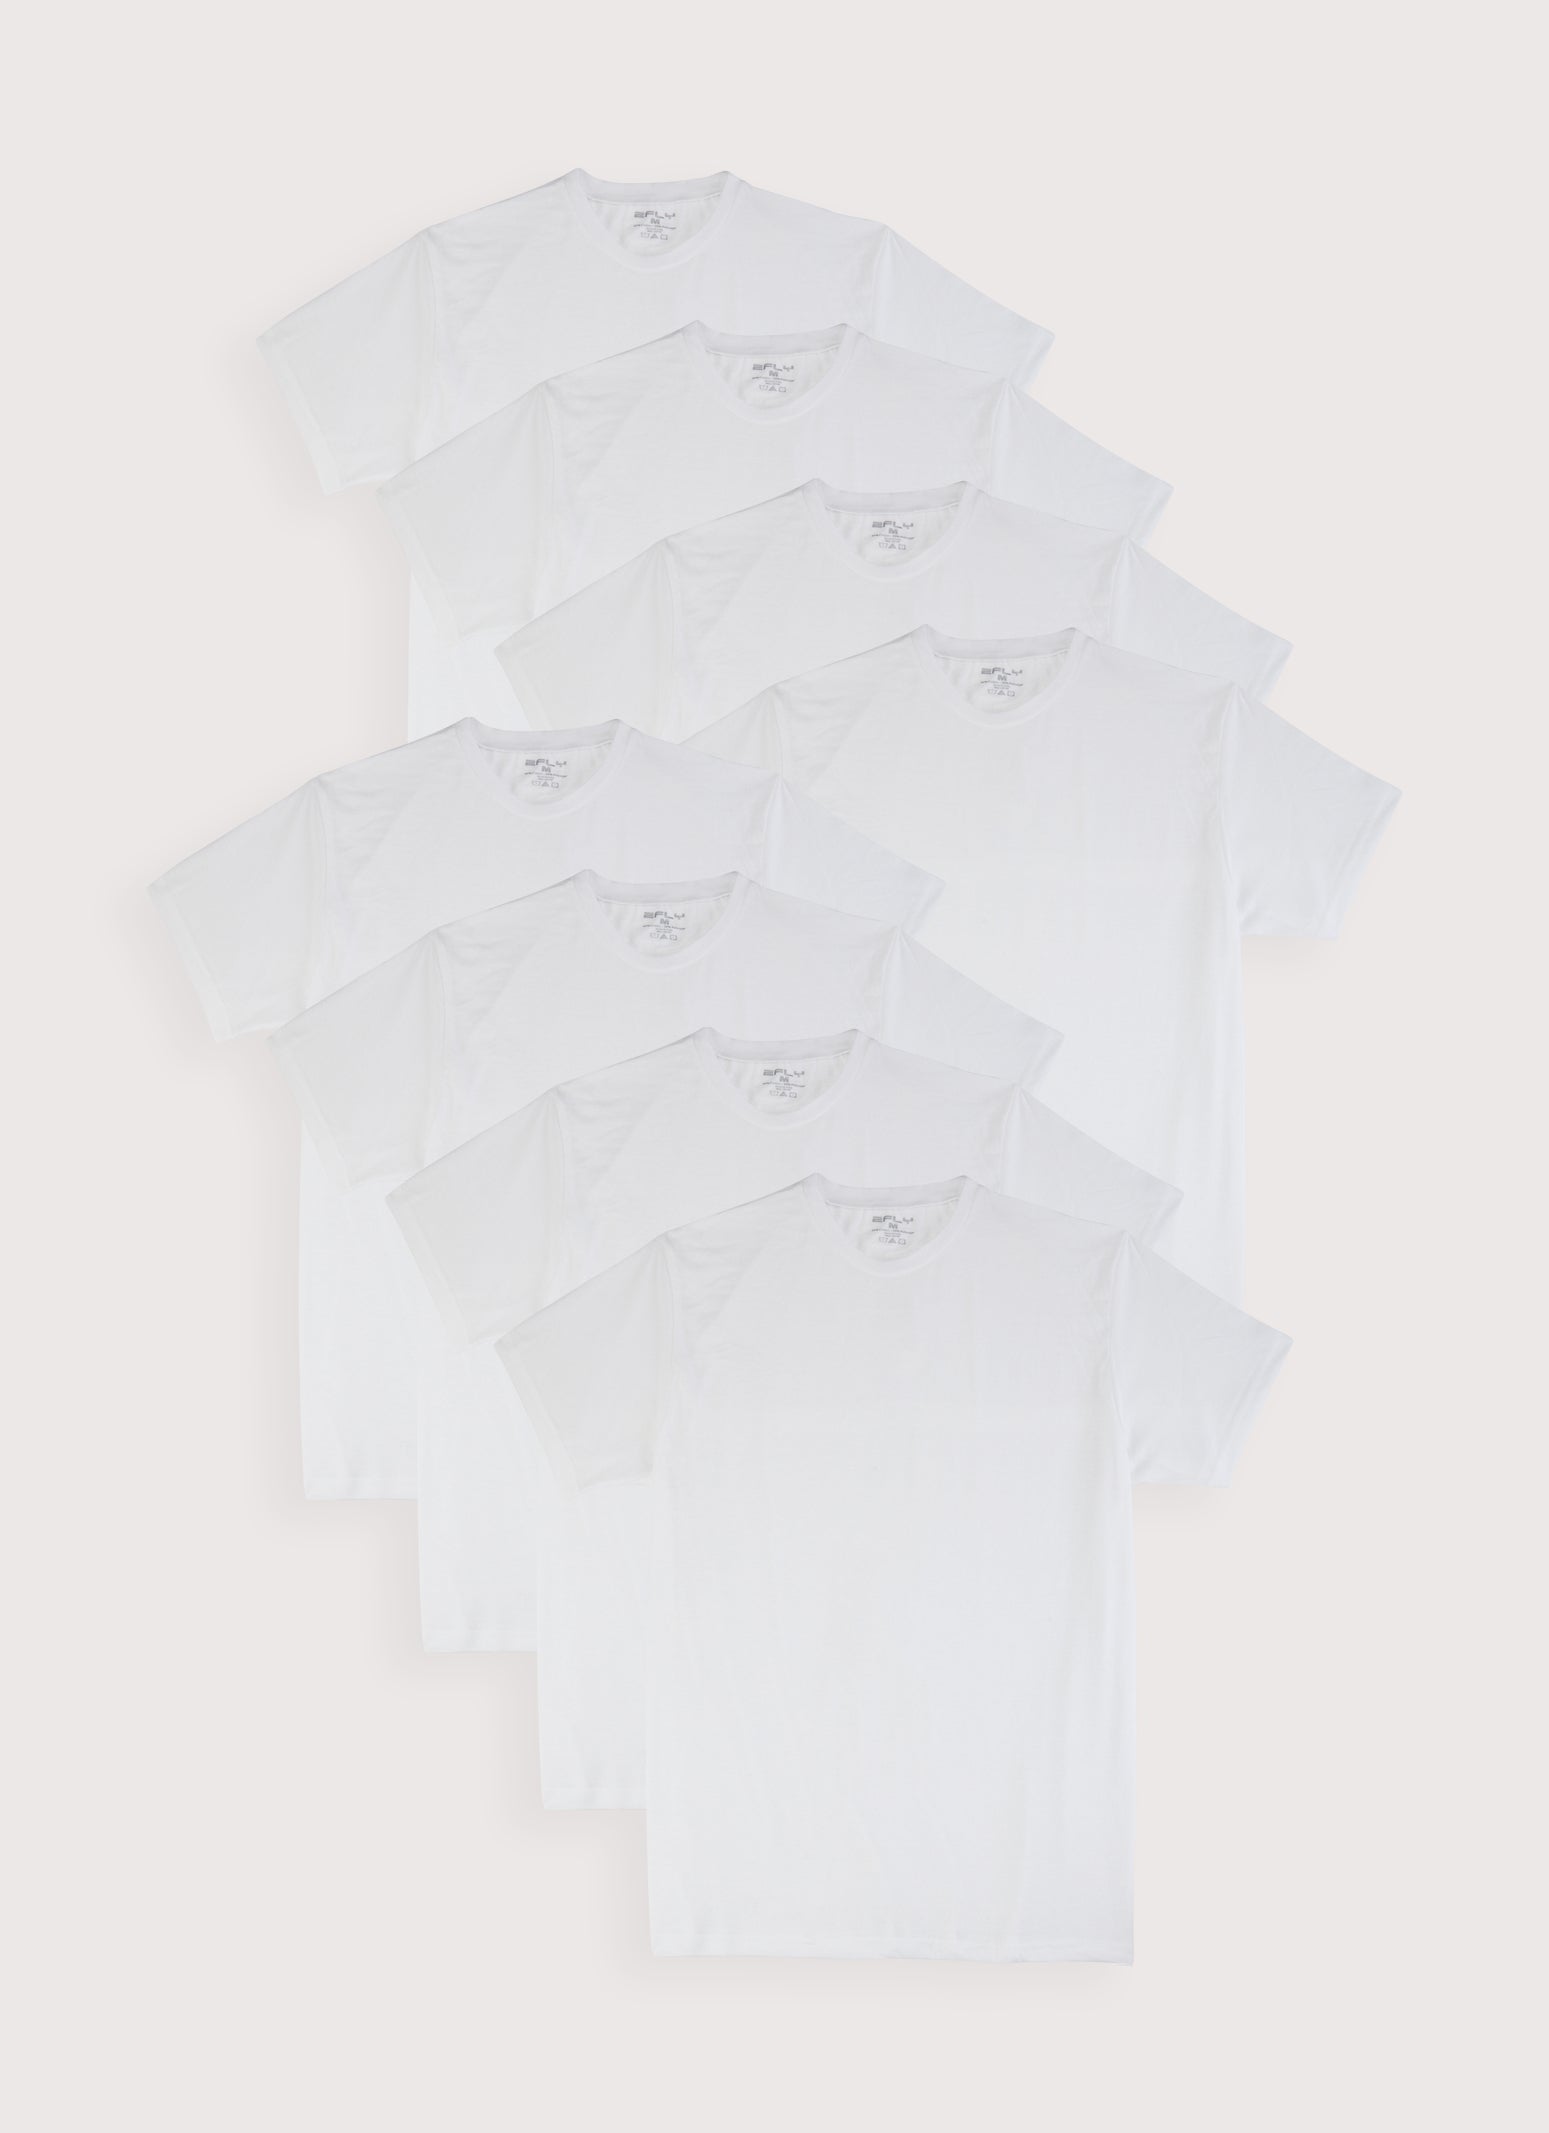 Womens Mens Crew Neck Short Sleeve Tees 8 Pack, White, Size XL